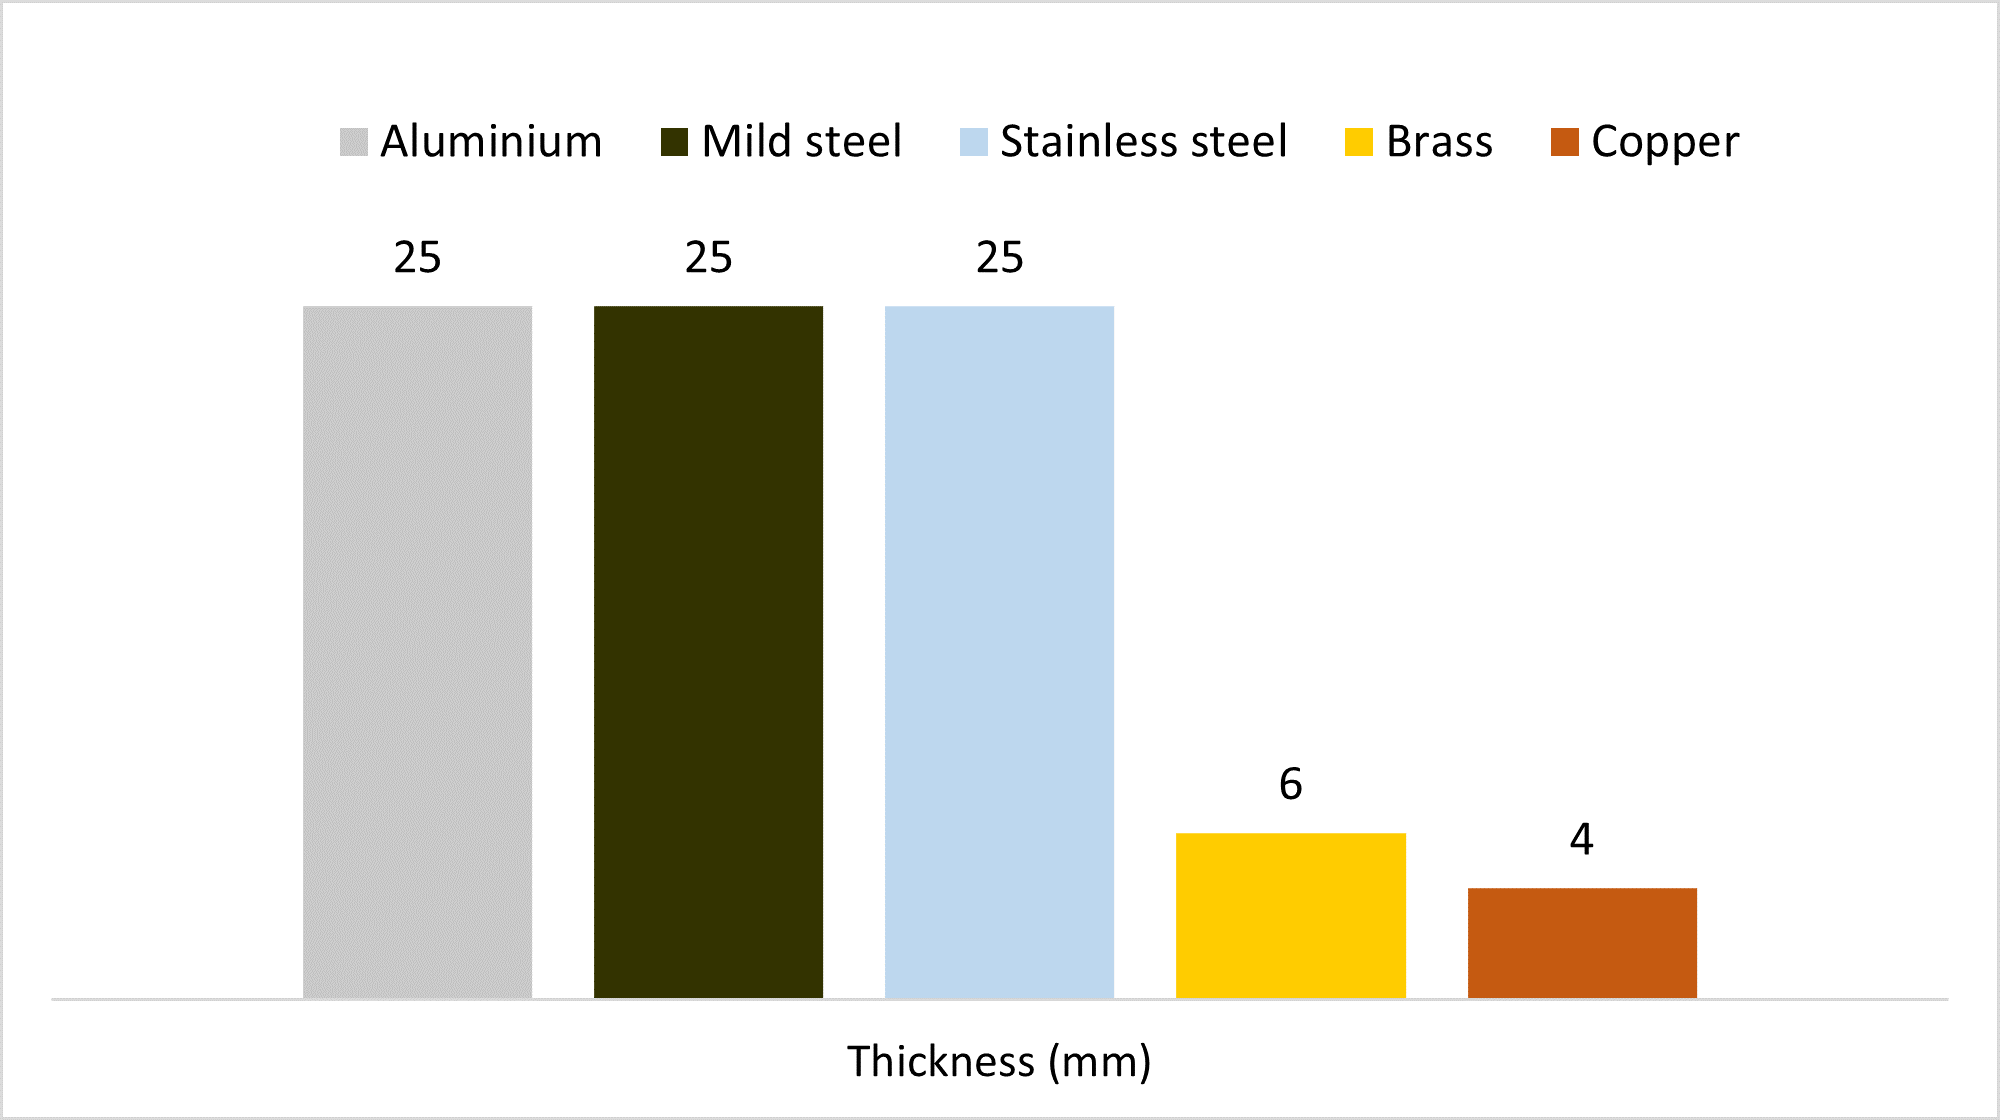 Metal type and thickness table